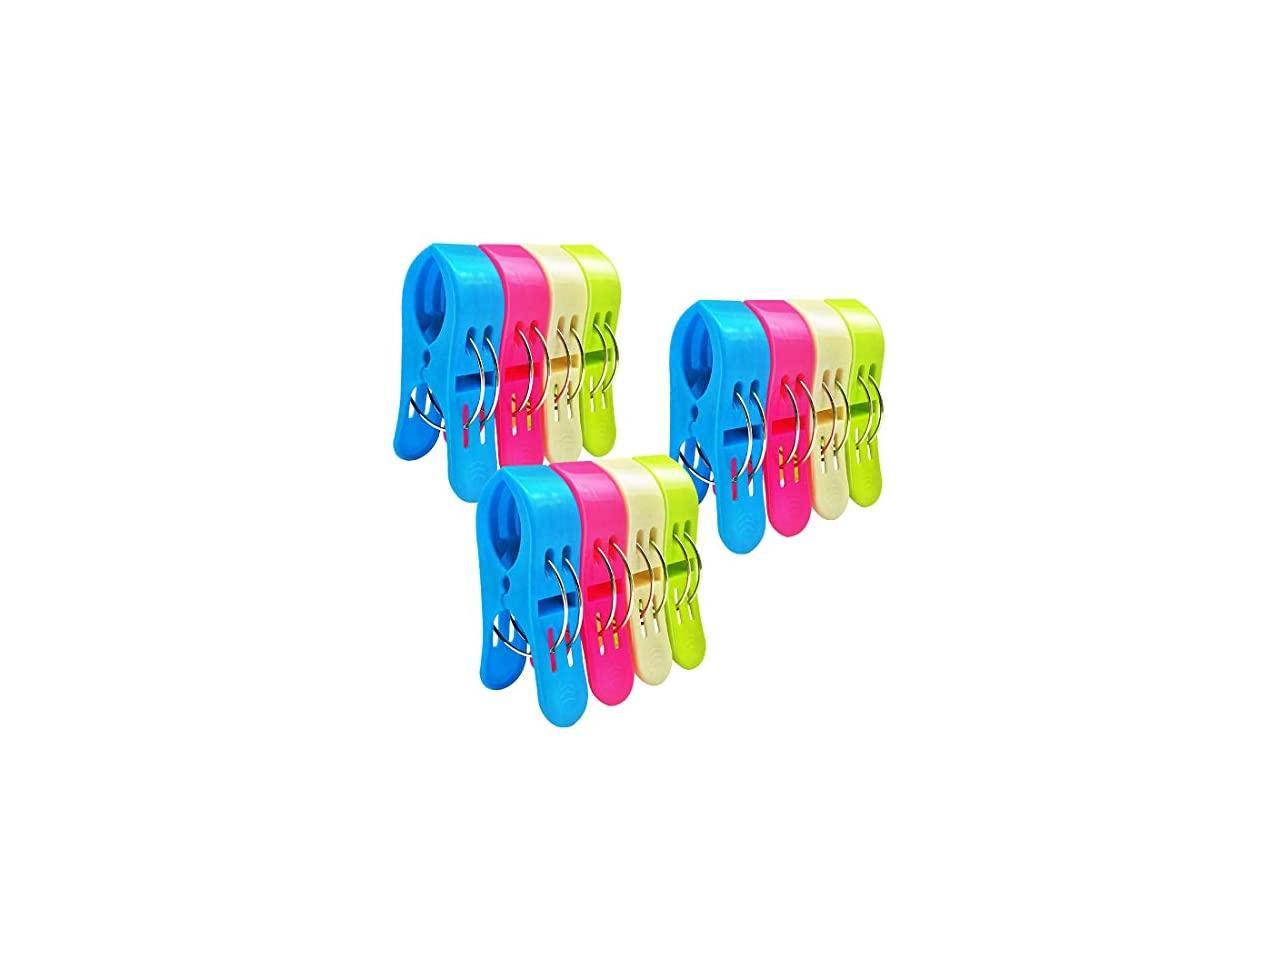 4 Pcs Big Beach Towel Clips for Chair Loungers Holders Clothes Pegs Pins Hanging 